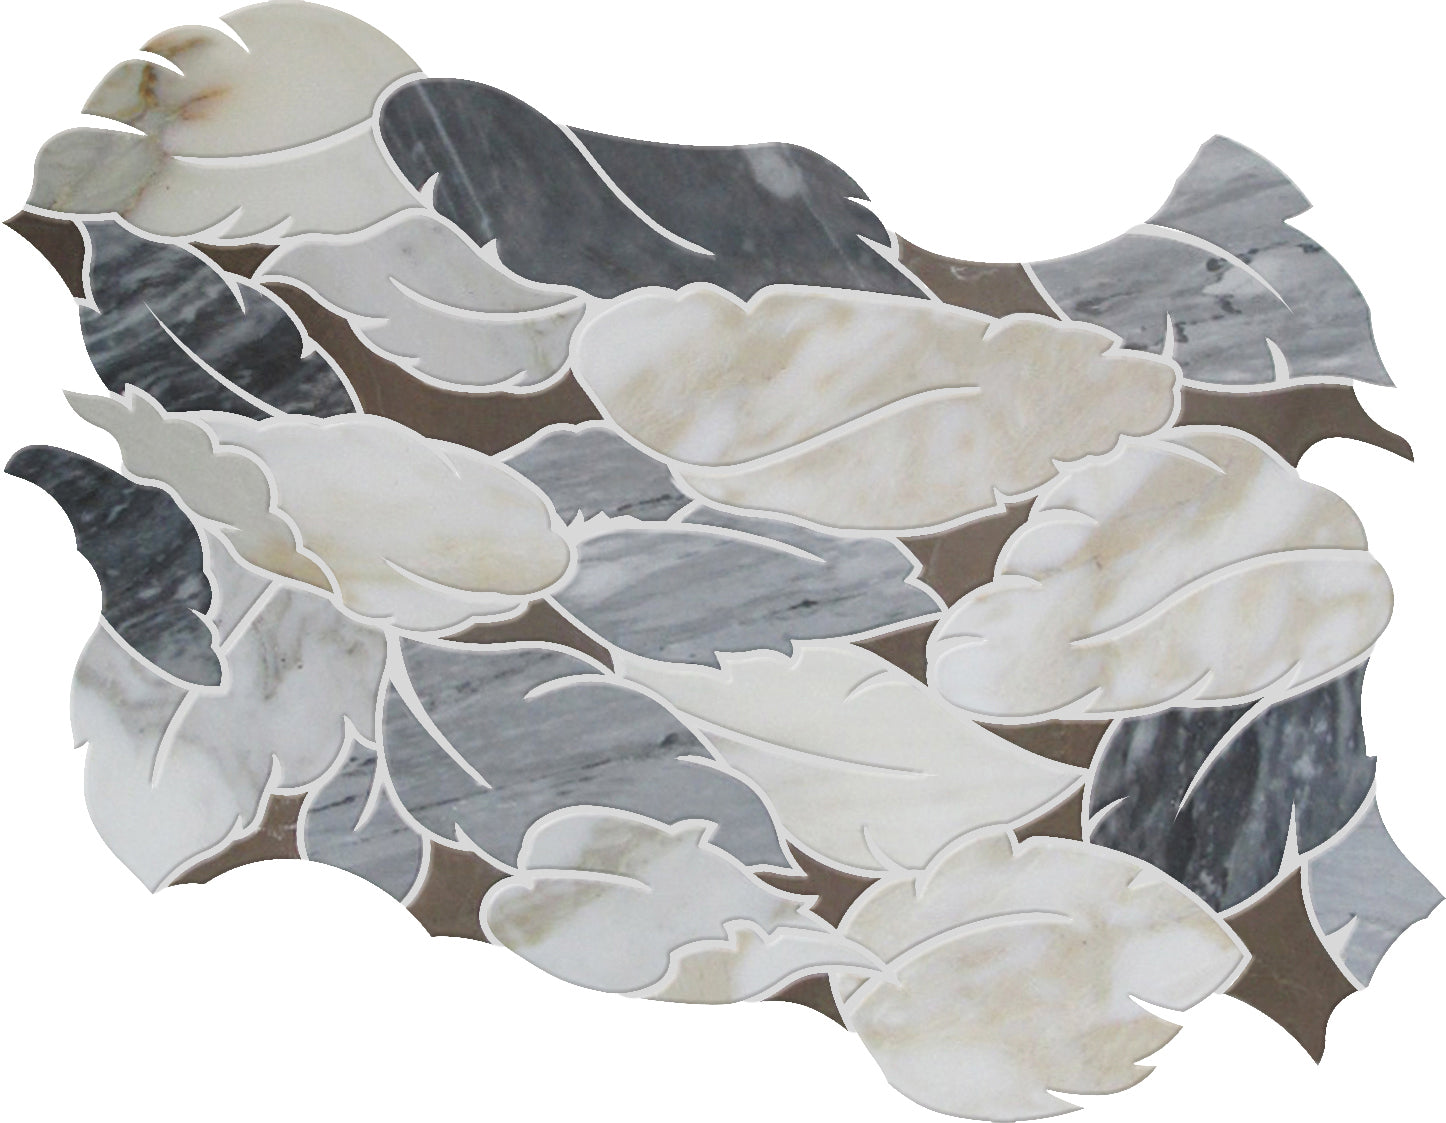 mir skalini majesty esther wall and floor mosaic distributed by surface group natural materials